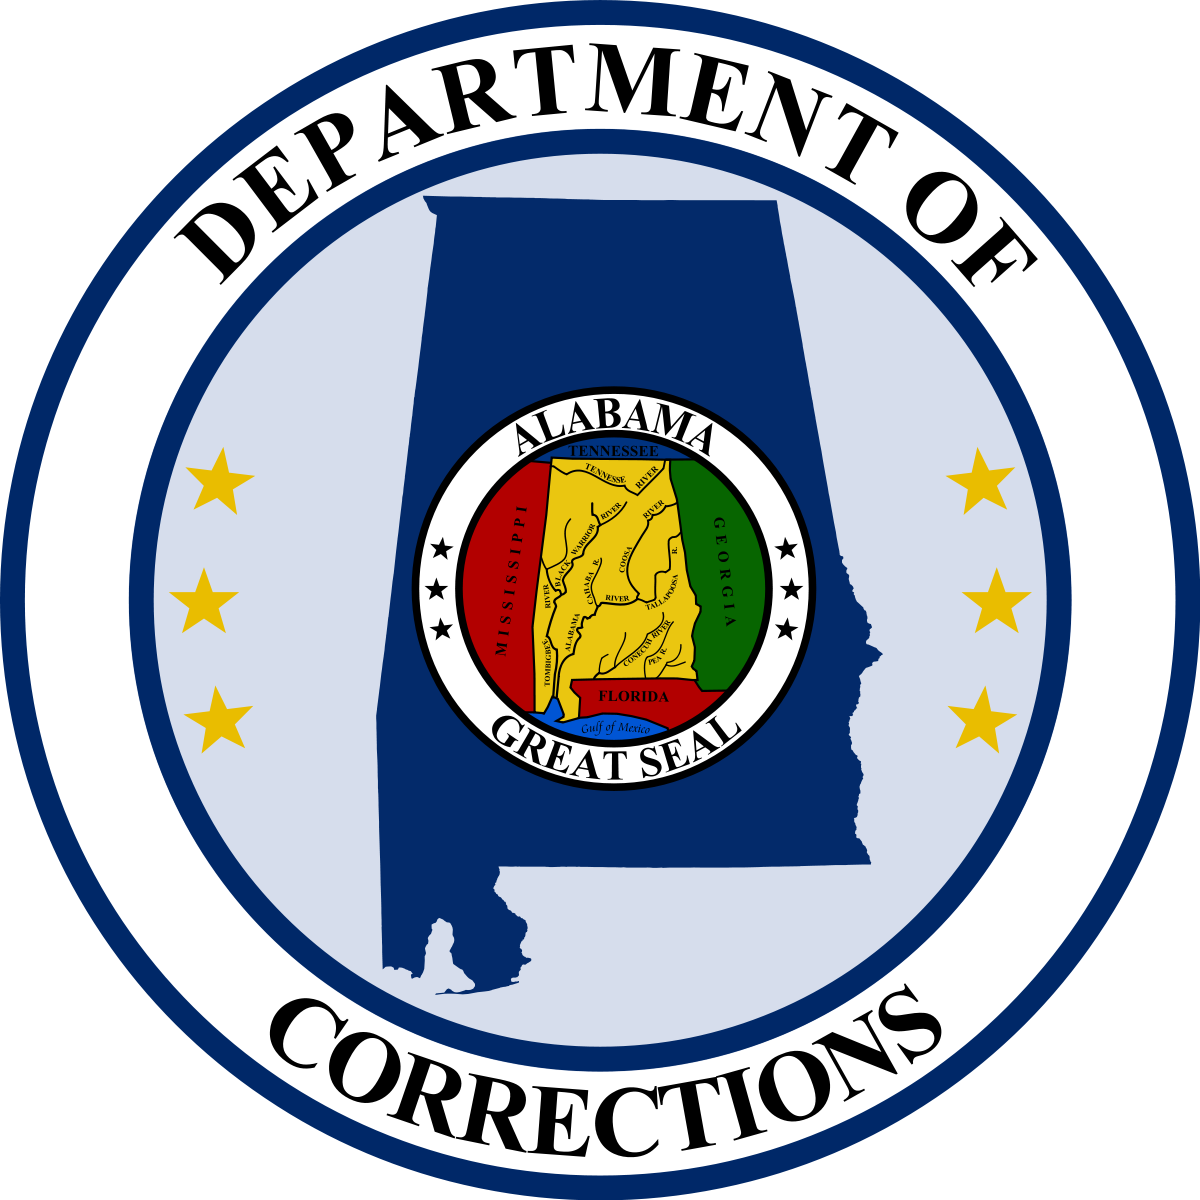 State Correctional Facilities